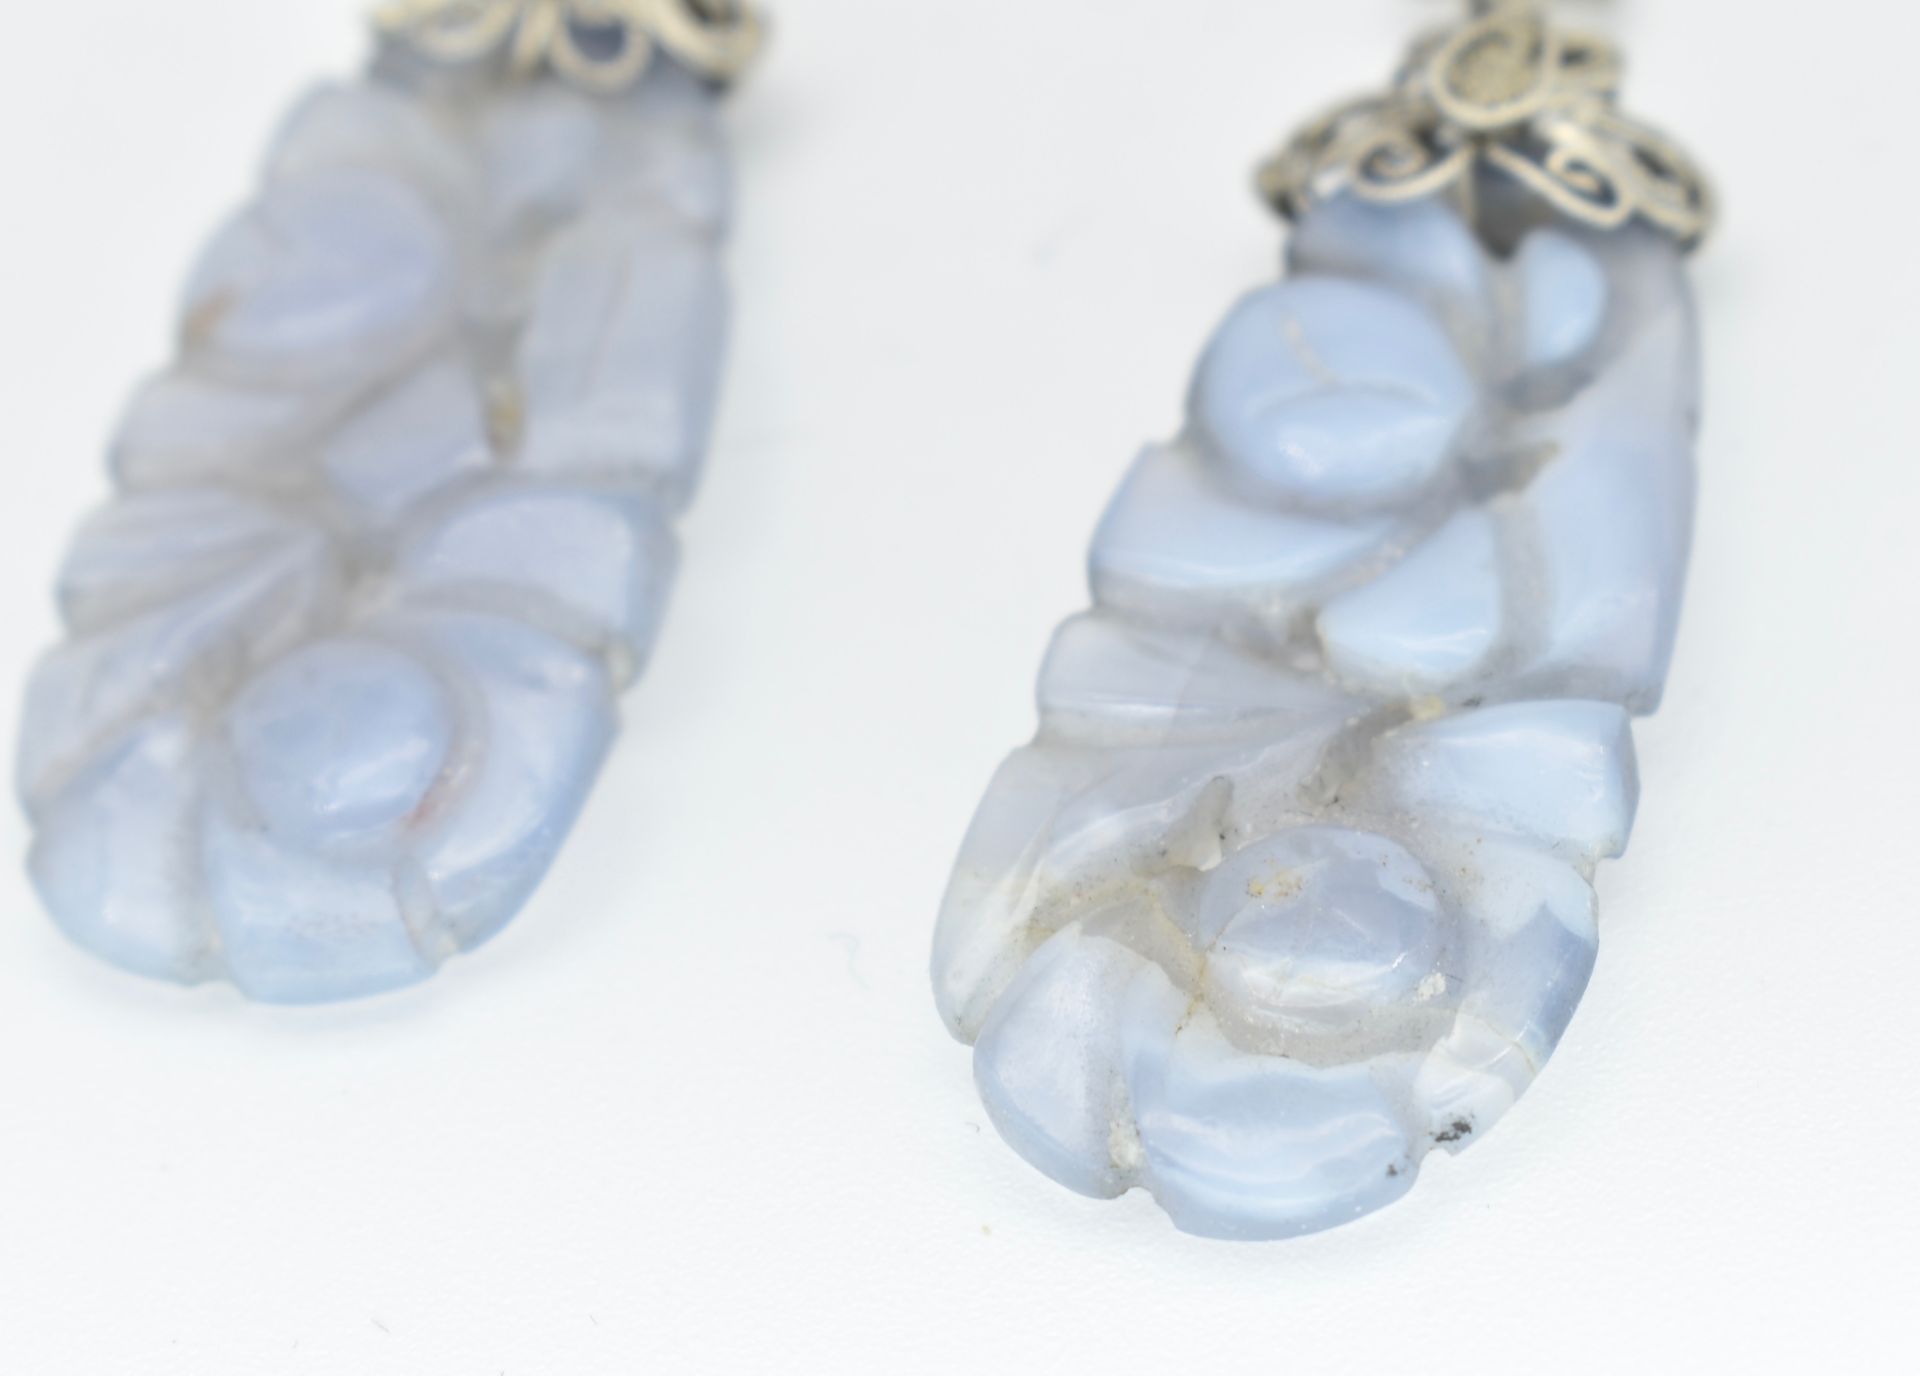 Pair of Chinese Carved Agate Pendant Earrings - Image 2 of 4